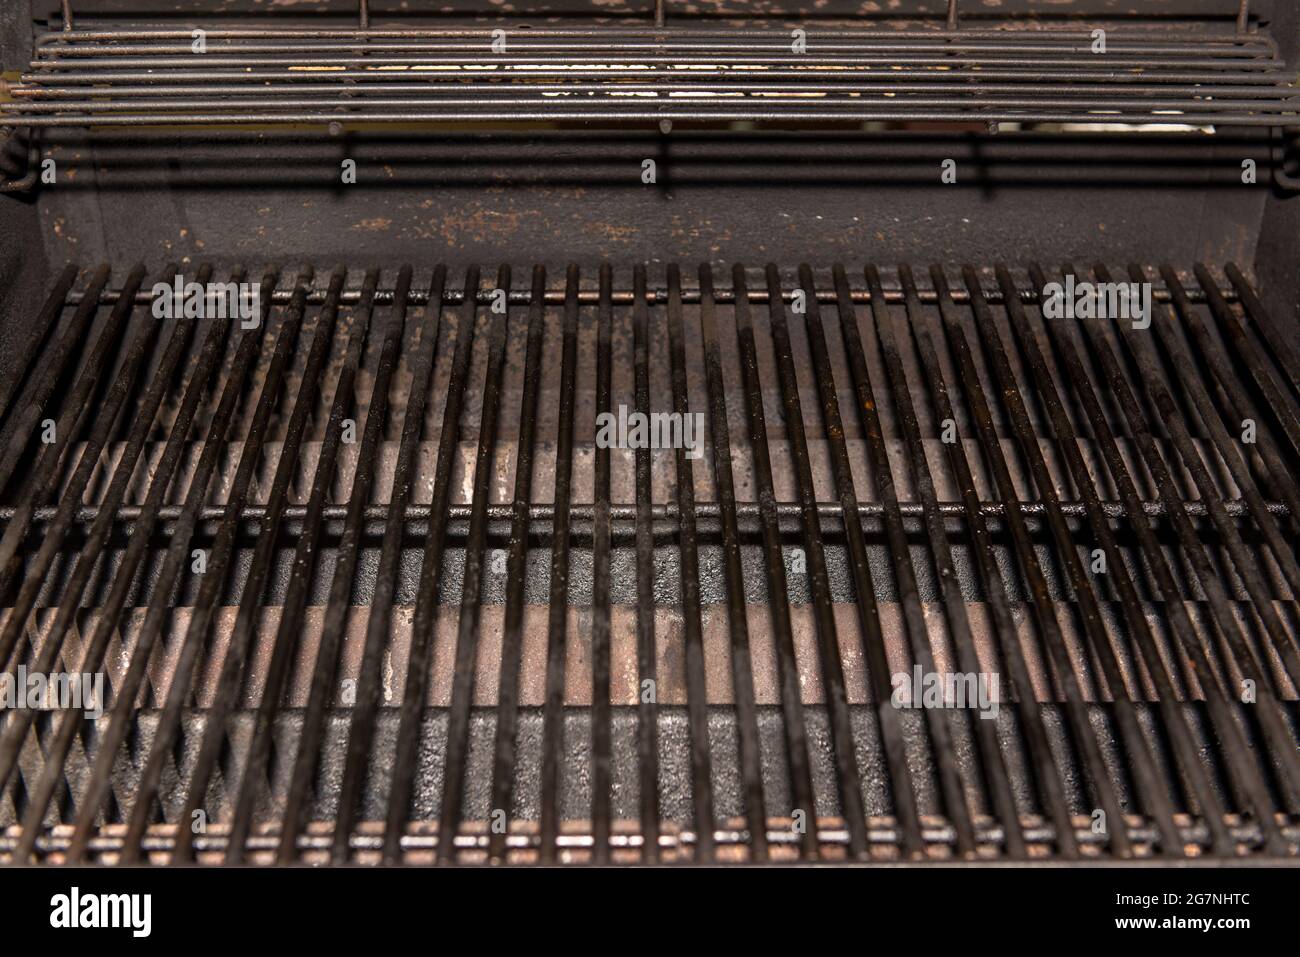 Old Empty Barbecue Grill Texture with a Thick Layer of Soot and Carbon. Dirty Iron Bbq Lattice Background Top View with Place for Text. Dark Key Photo Stock Photo